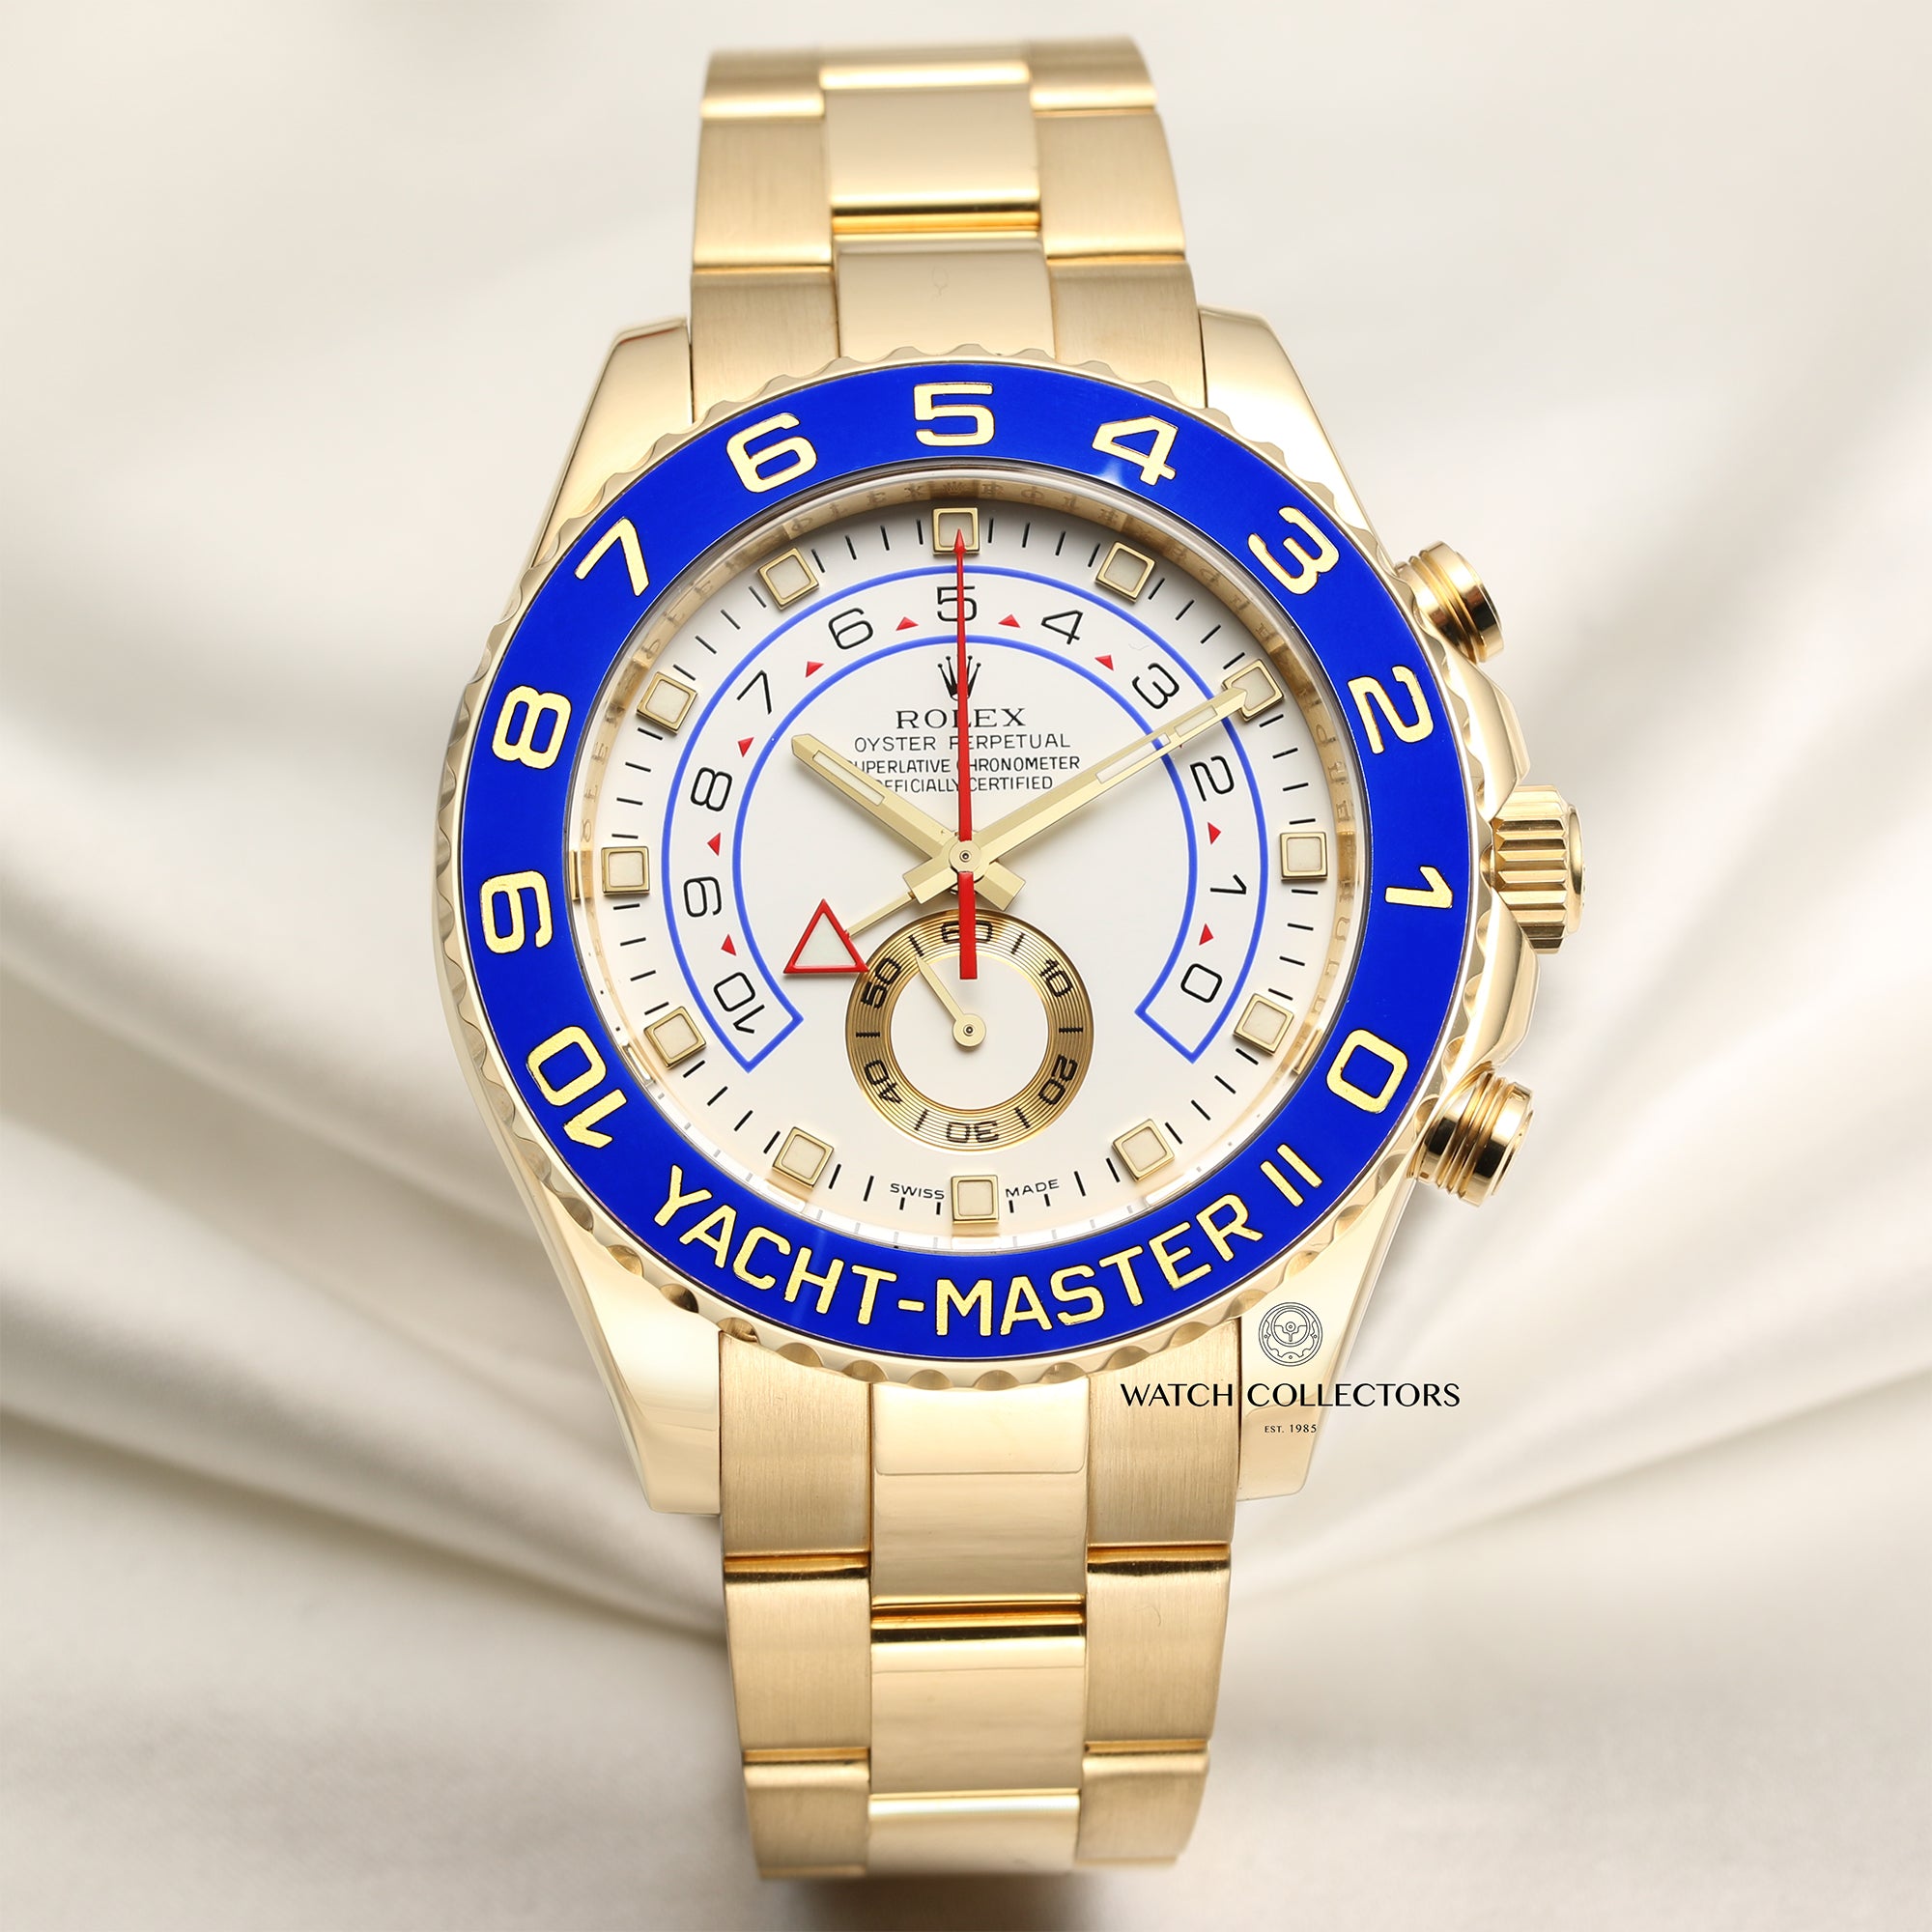 Rolex Yacht-Master II 116688 18k Yellow Gold – Watch Collectors